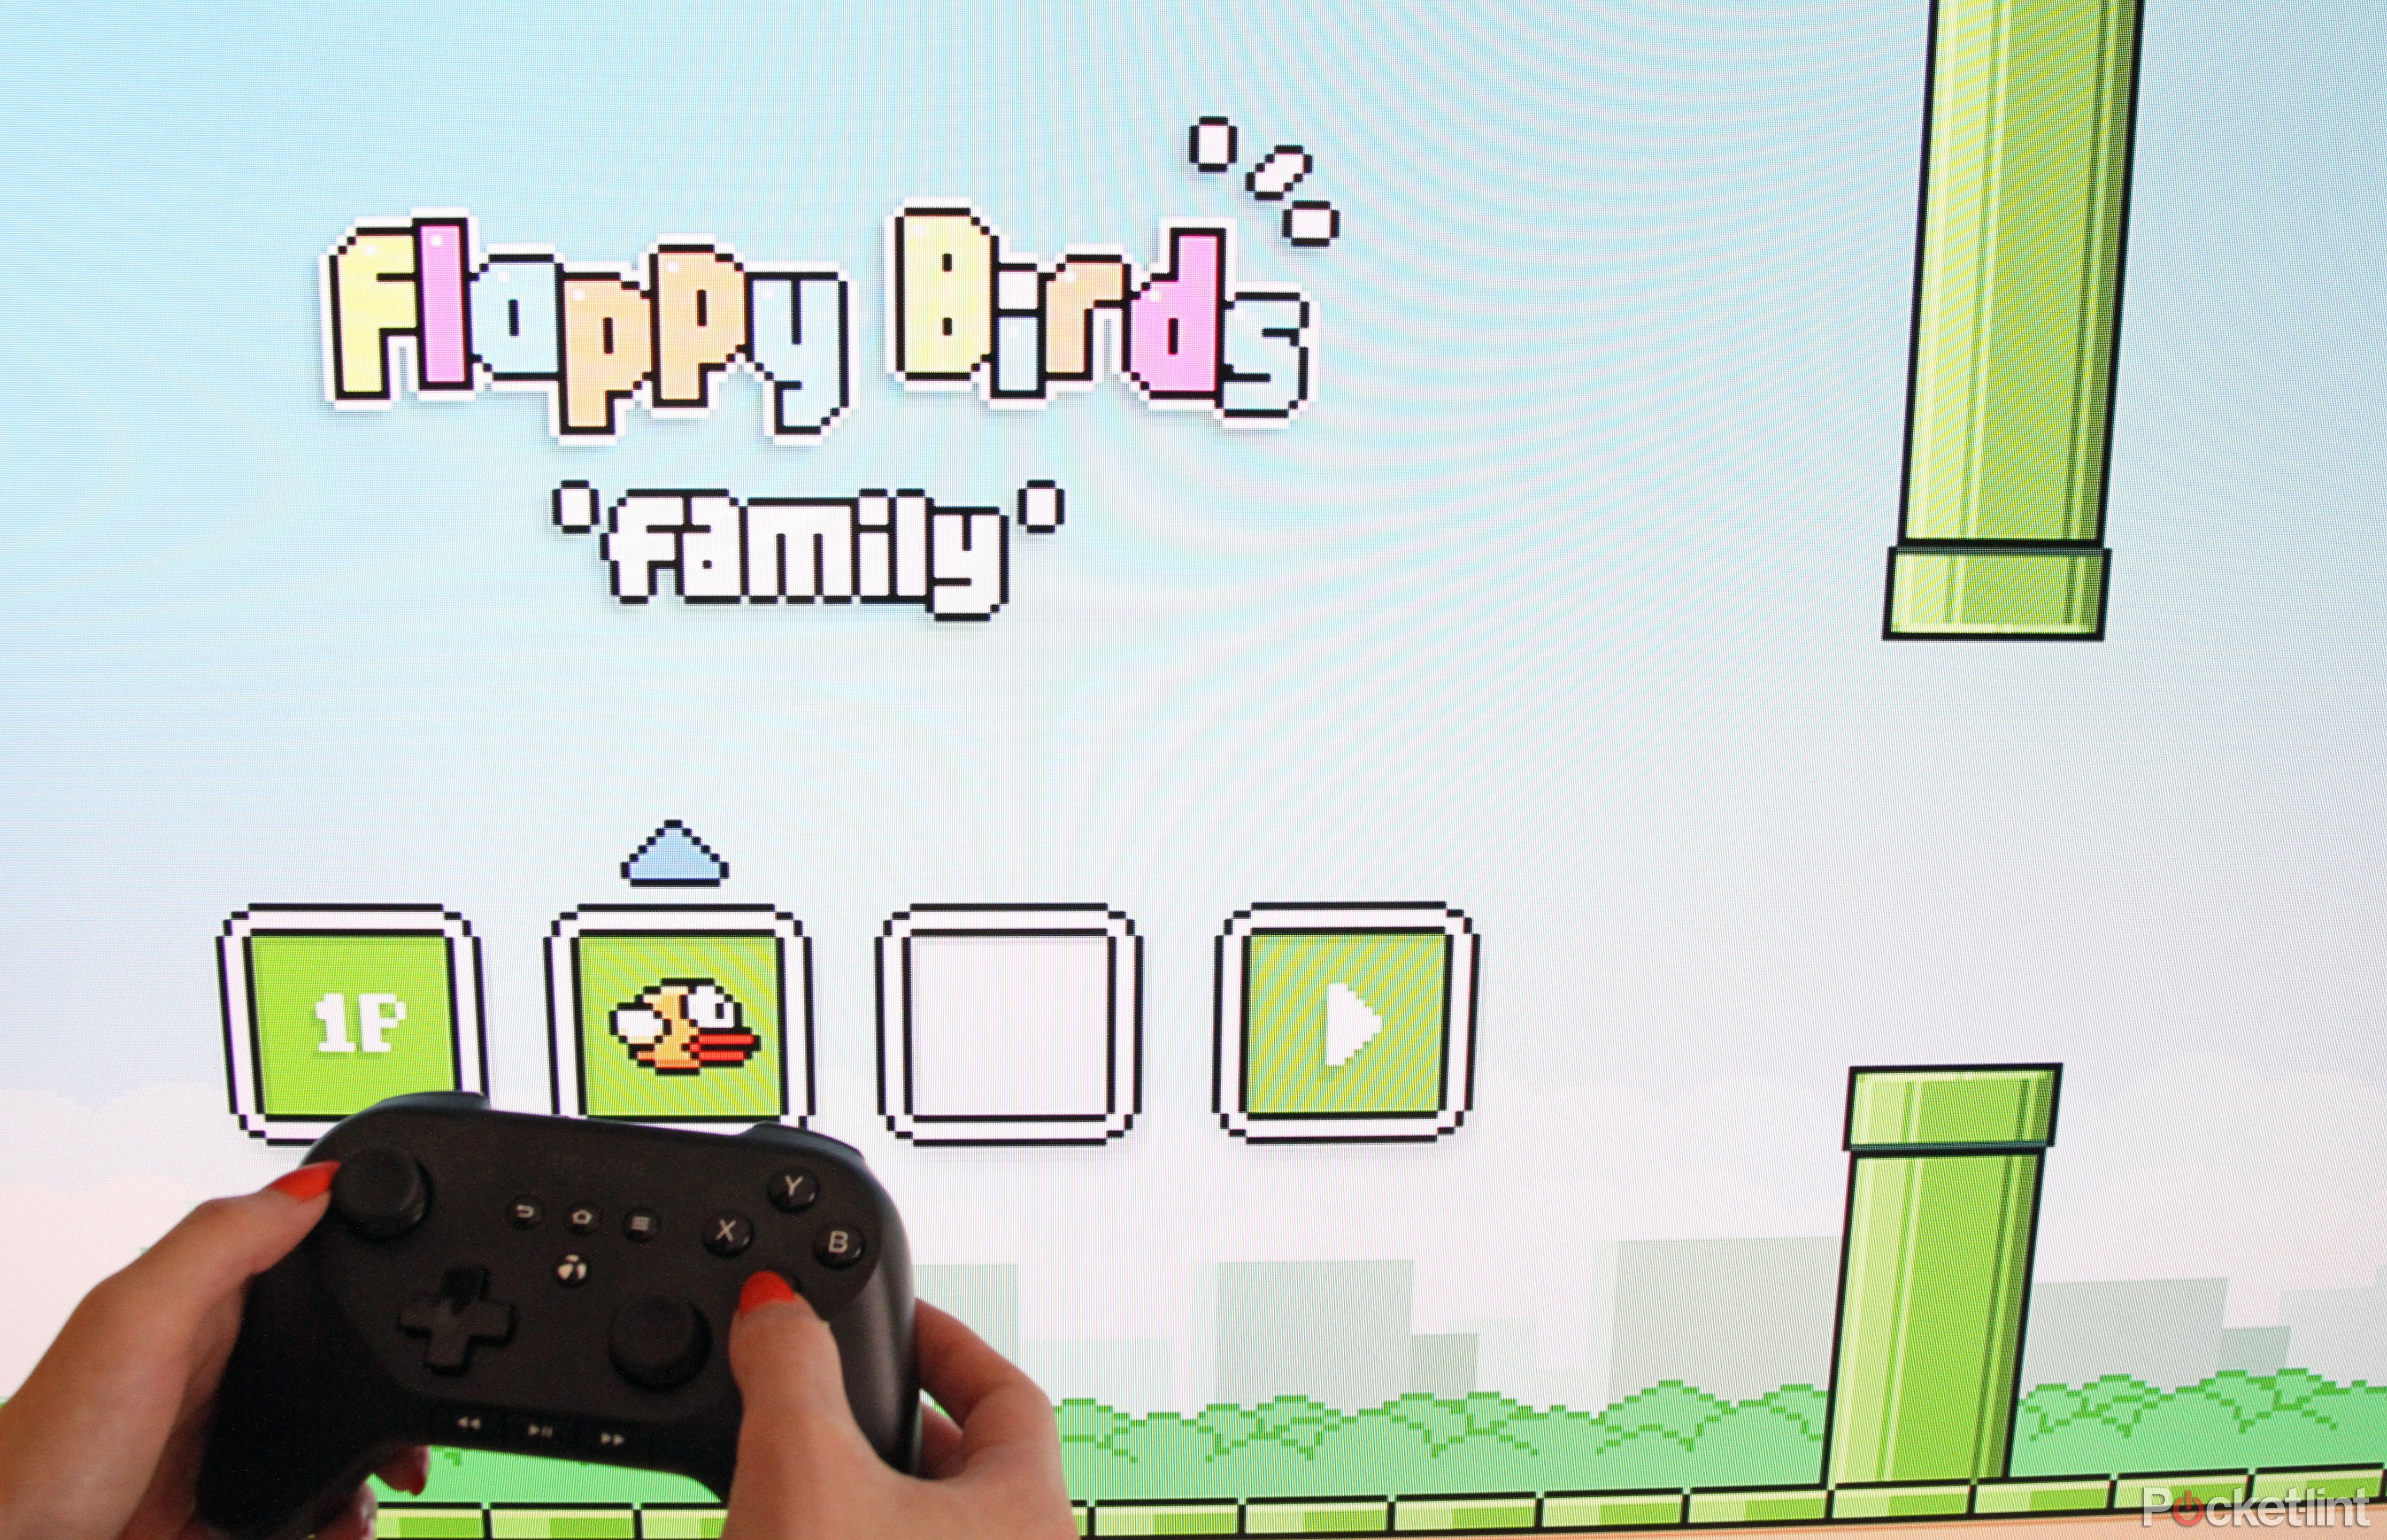 If you're missing Flappy Bird then try  Fire TV